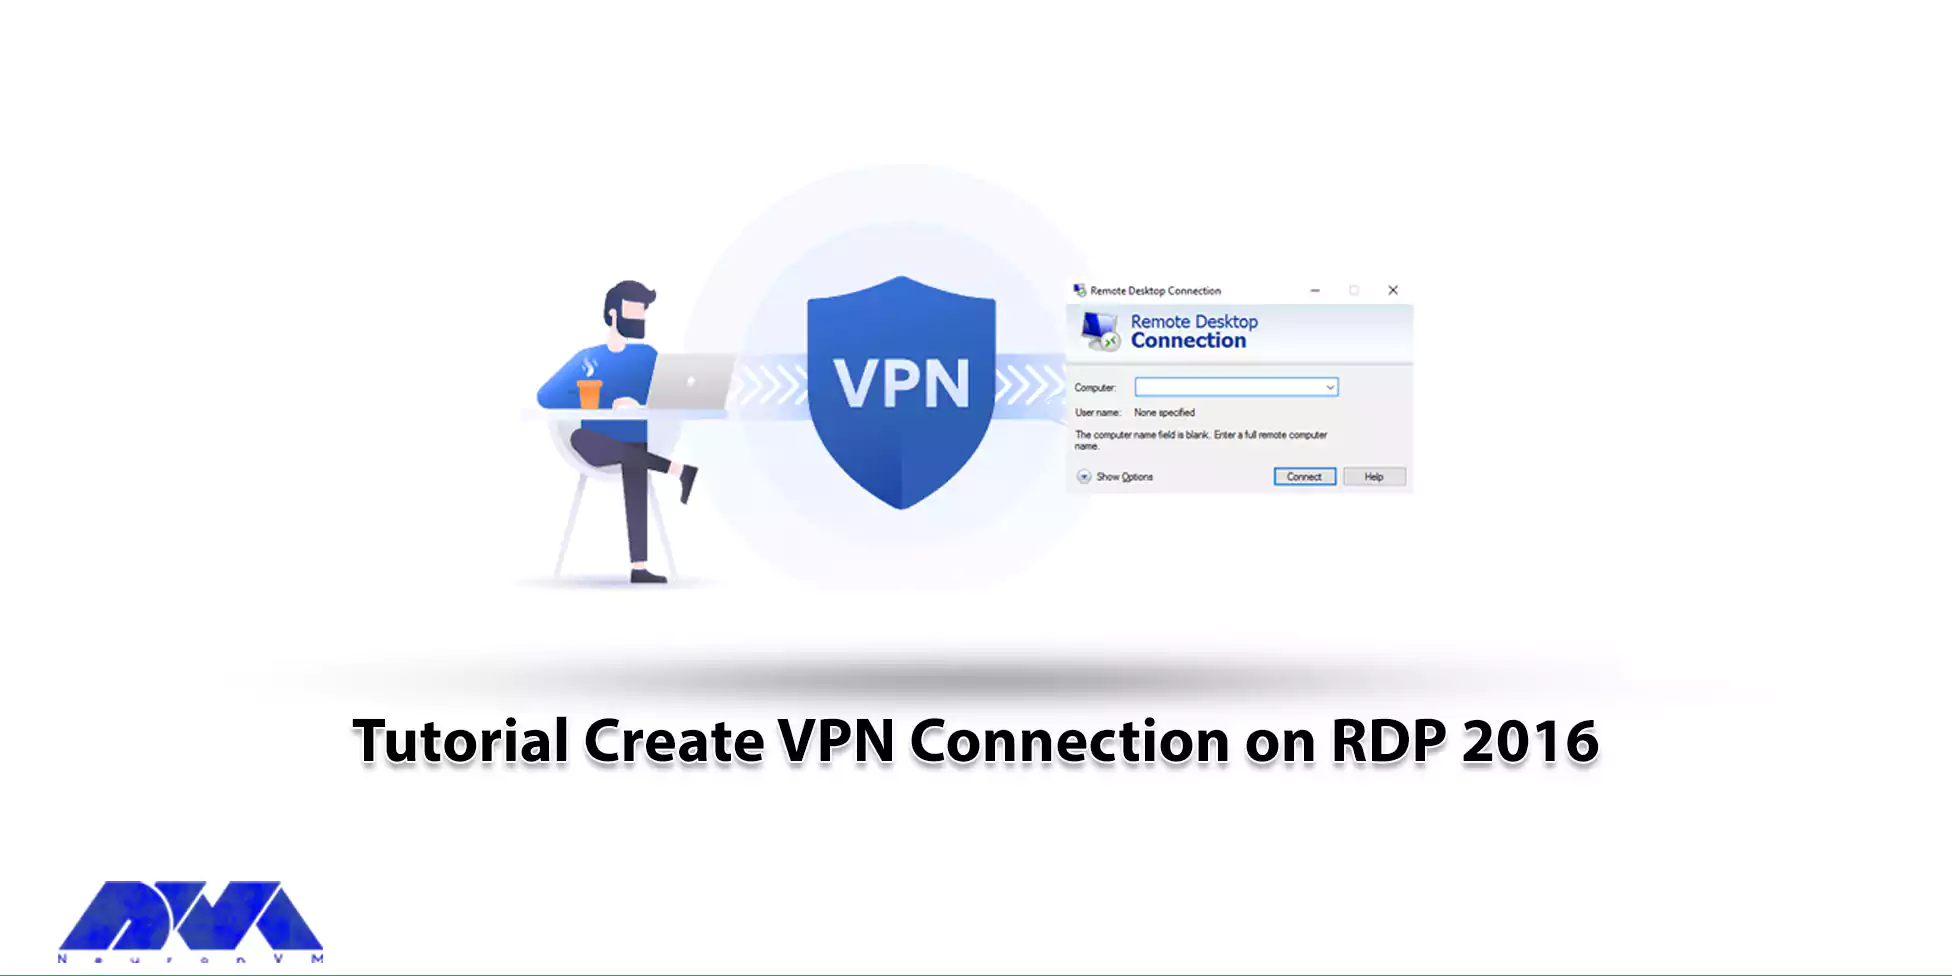 Tutorial Create VPN Connection on RDP 2016